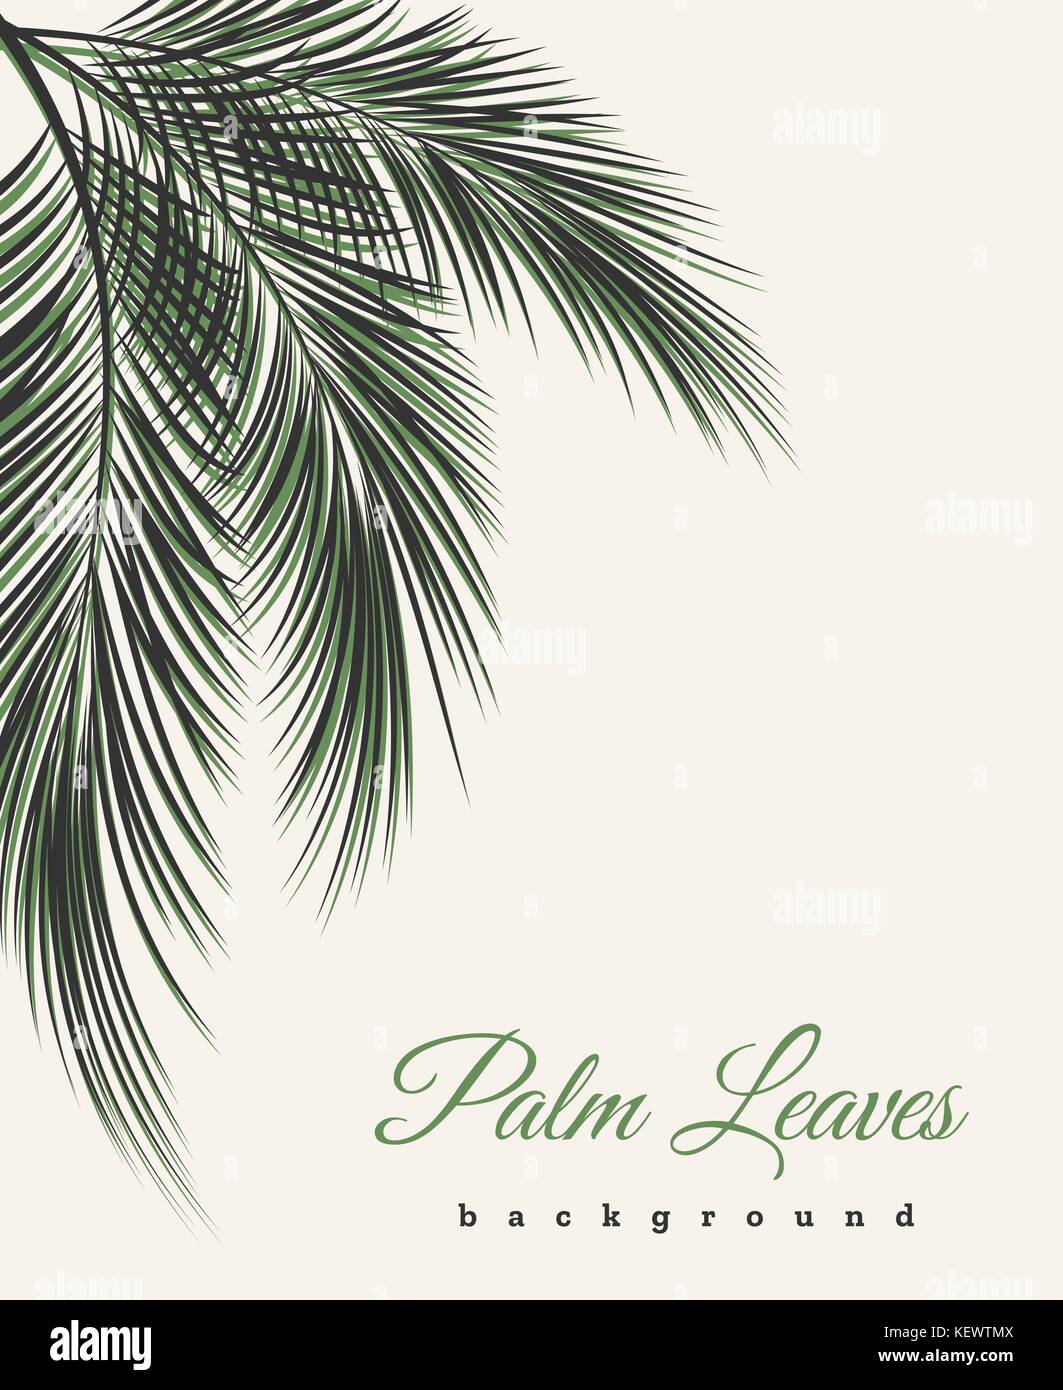 Palm leaves vintage background. Palm tree leaf feathers pattern vector african or brazilian wallpaper with text Stock Vector